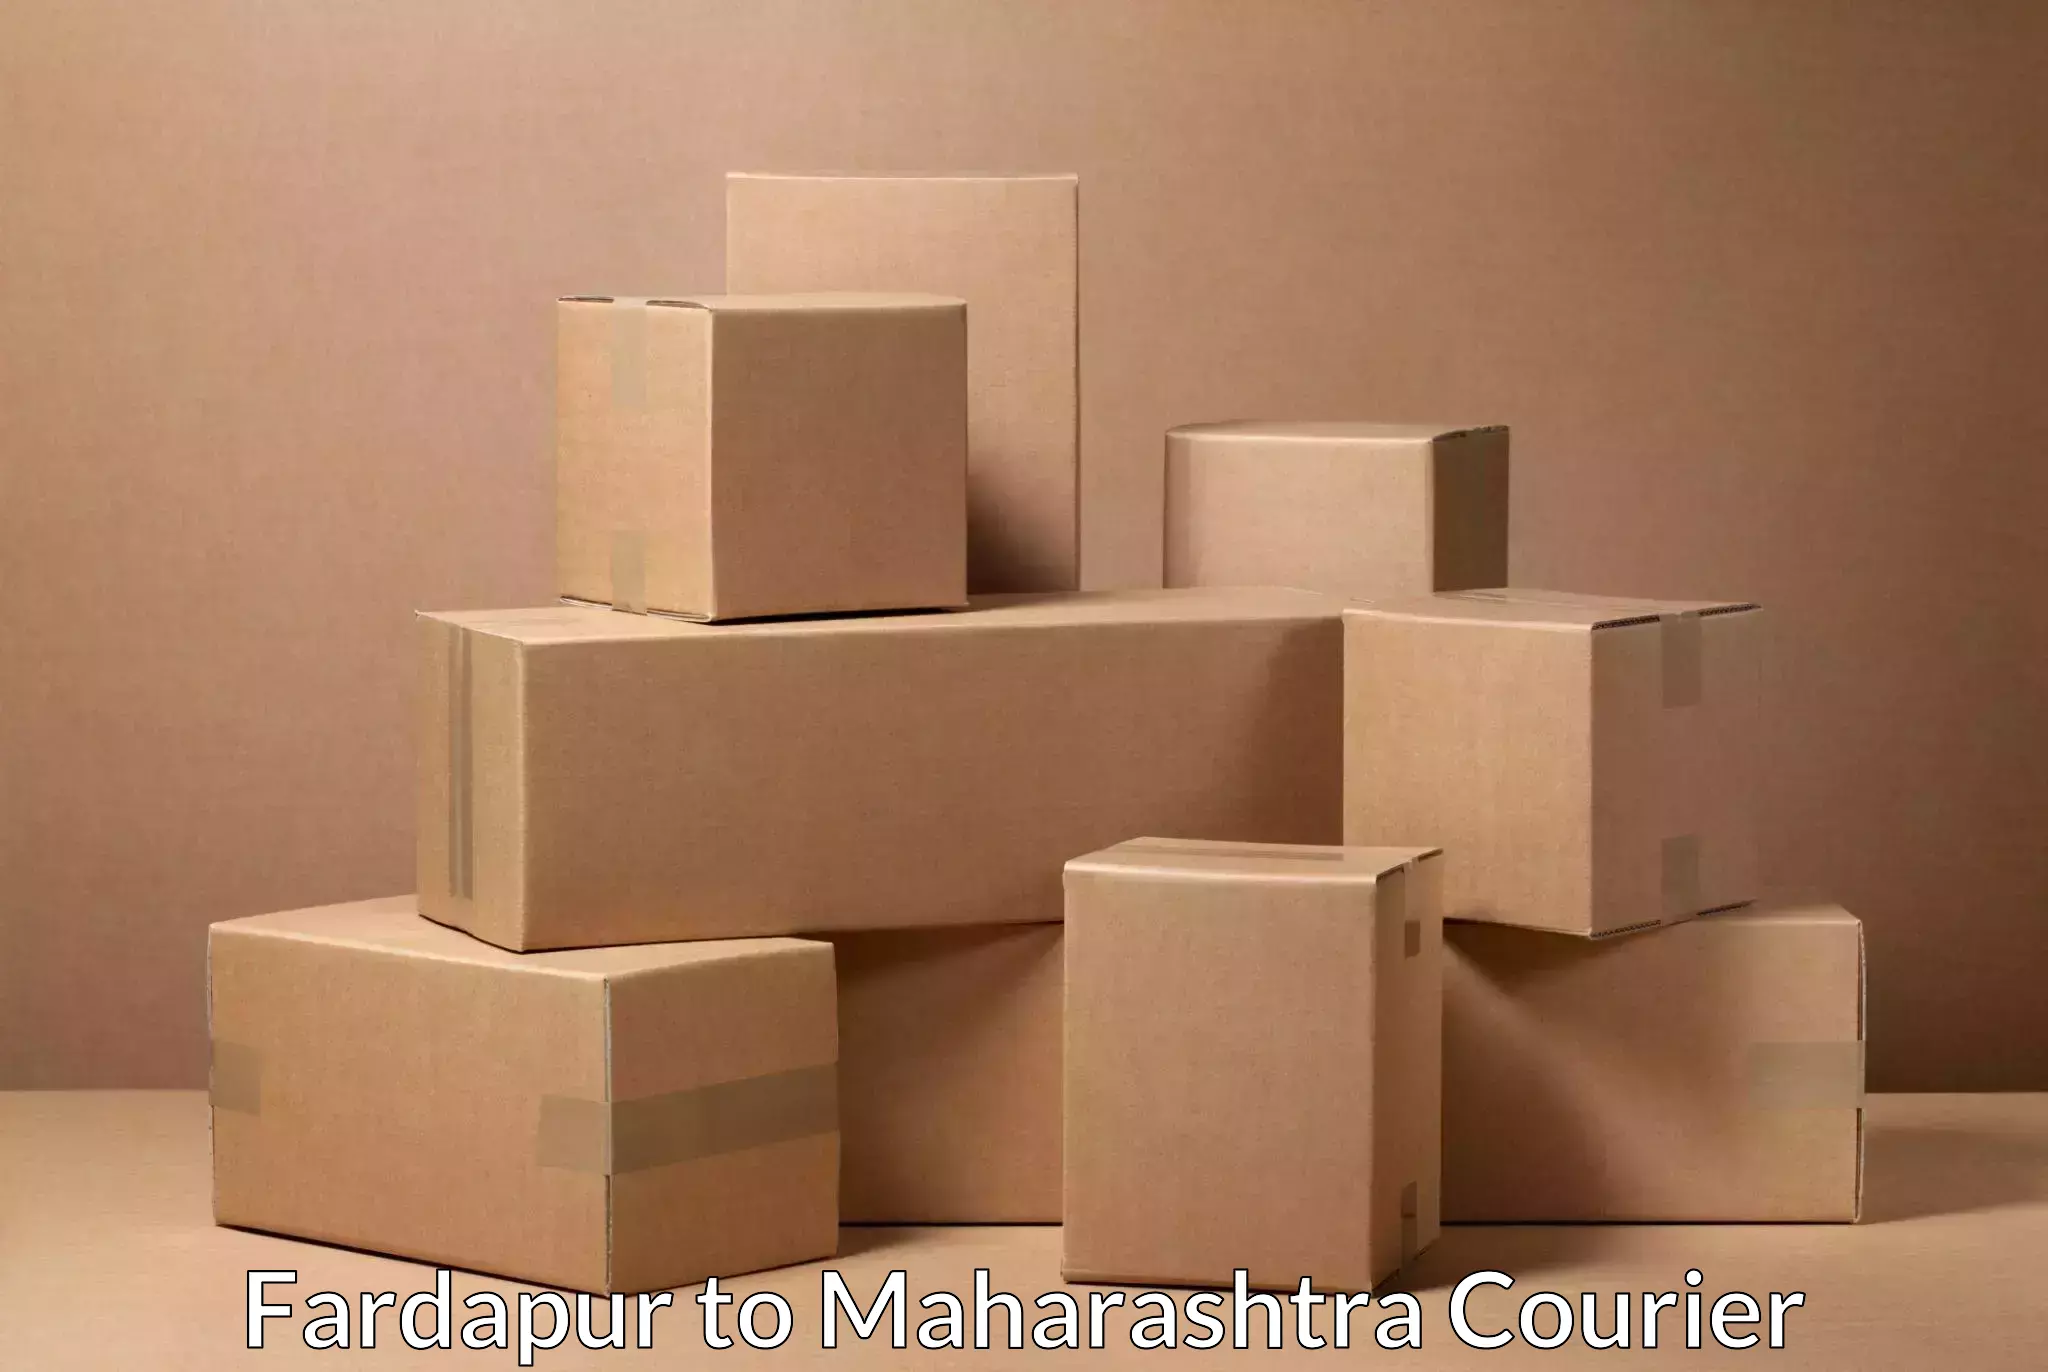 24-hour courier services in Fardapur to Vasai